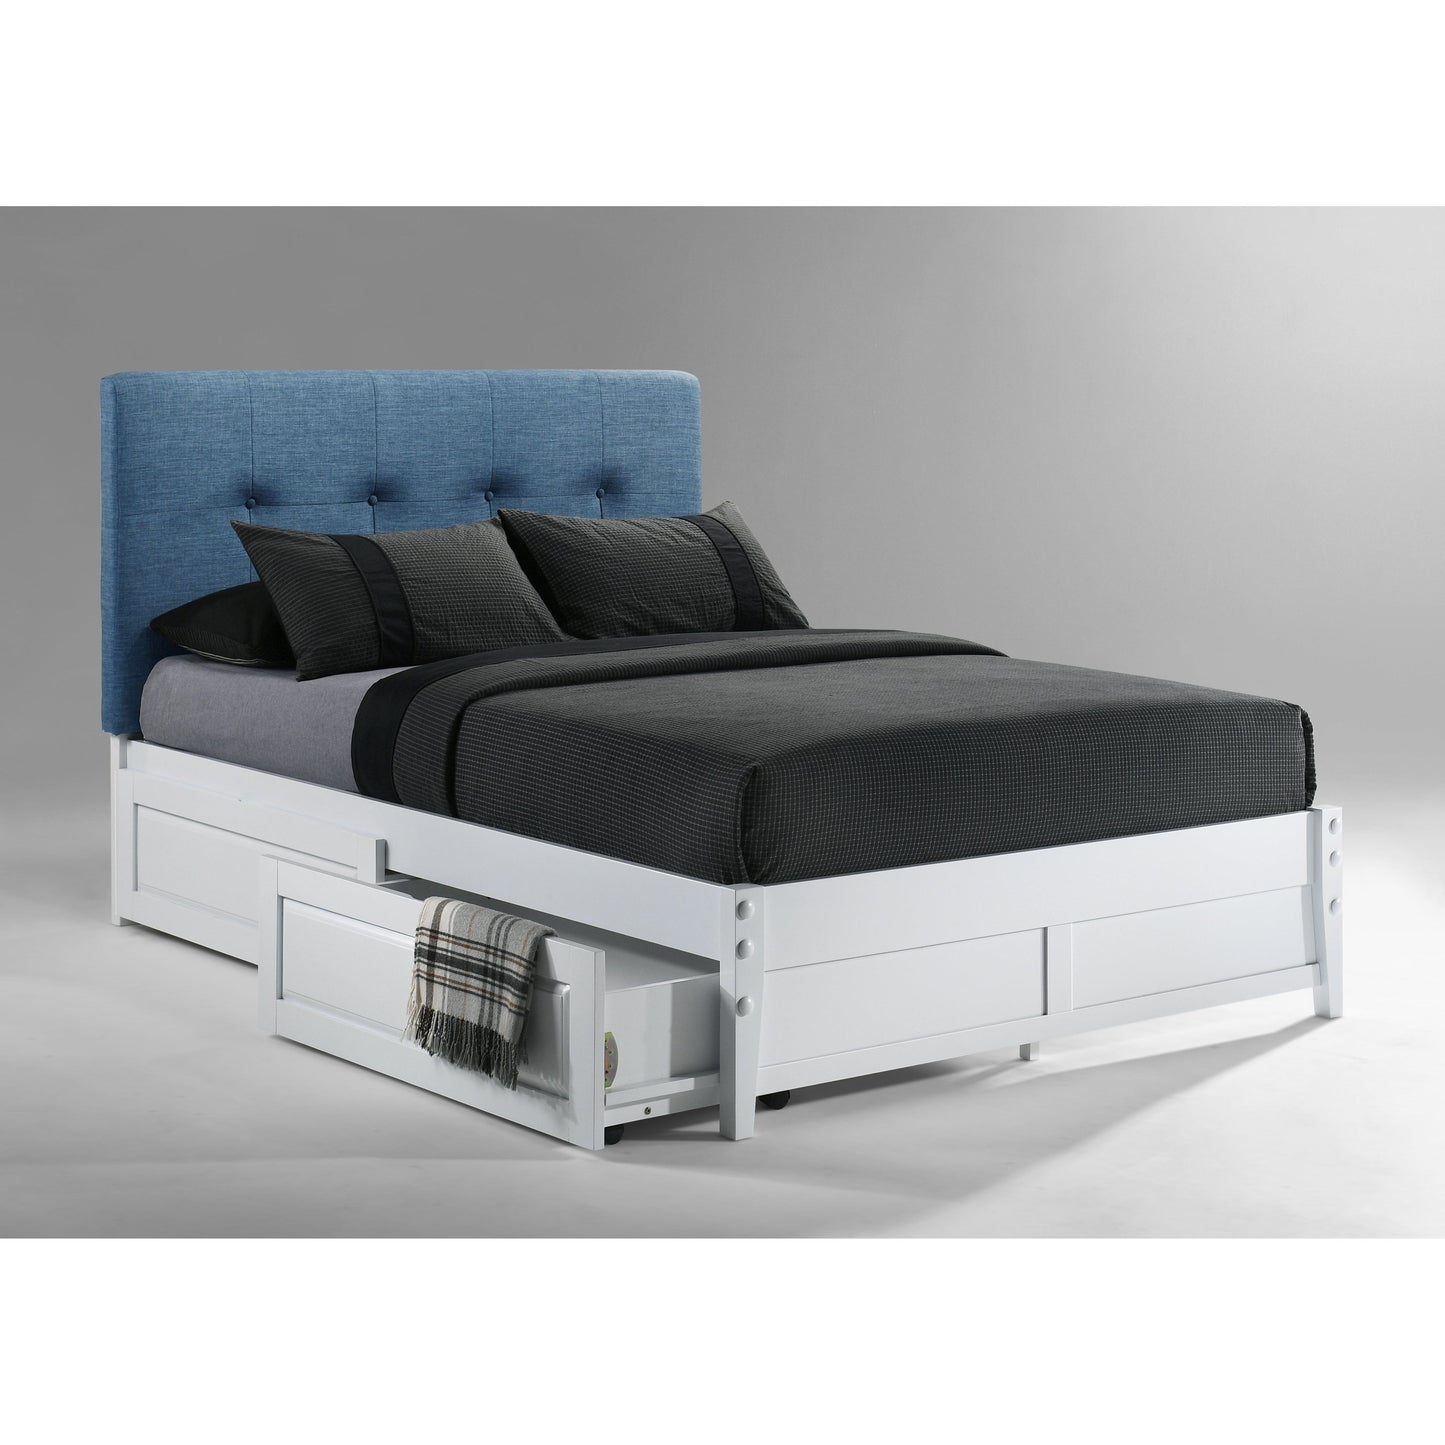 Night and Day Paprika Full Bed in Teal with White Finish Frame (K Series)